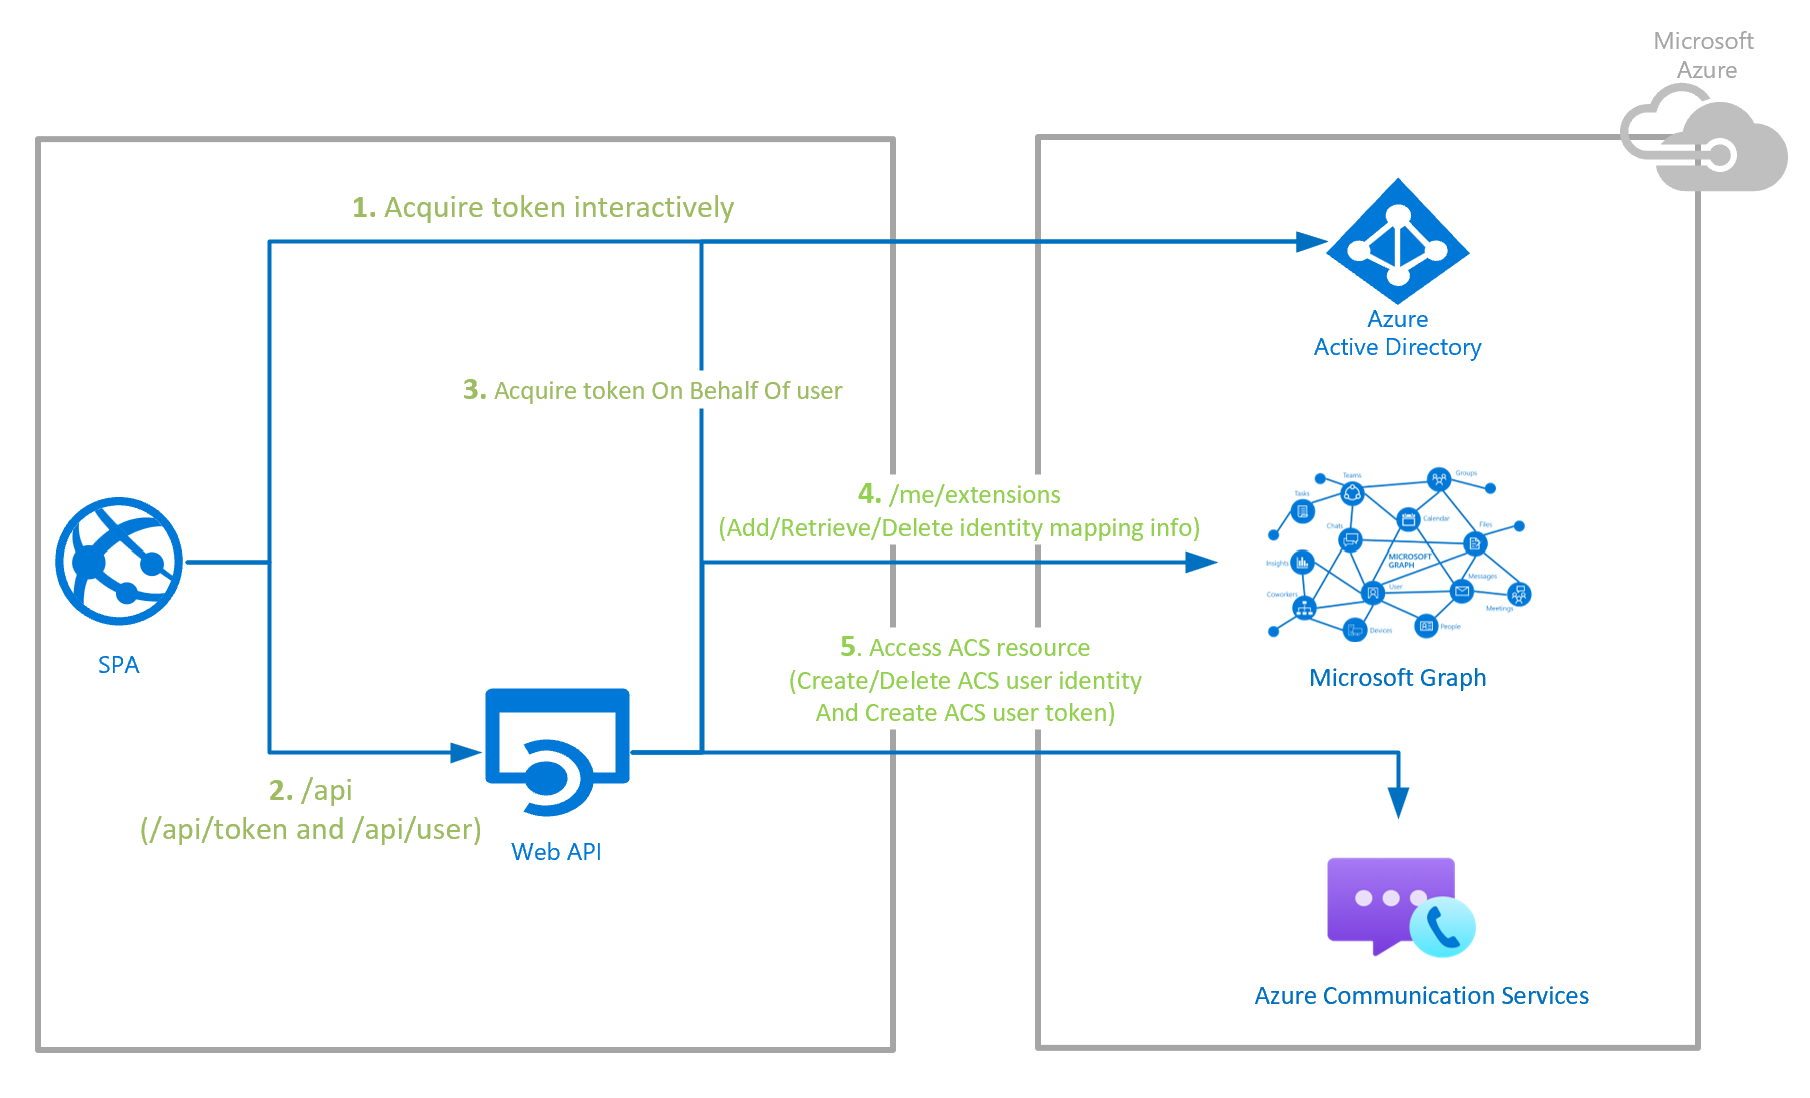 Build a trusted authentication service for Azure Communication Services using Azure Active Directory